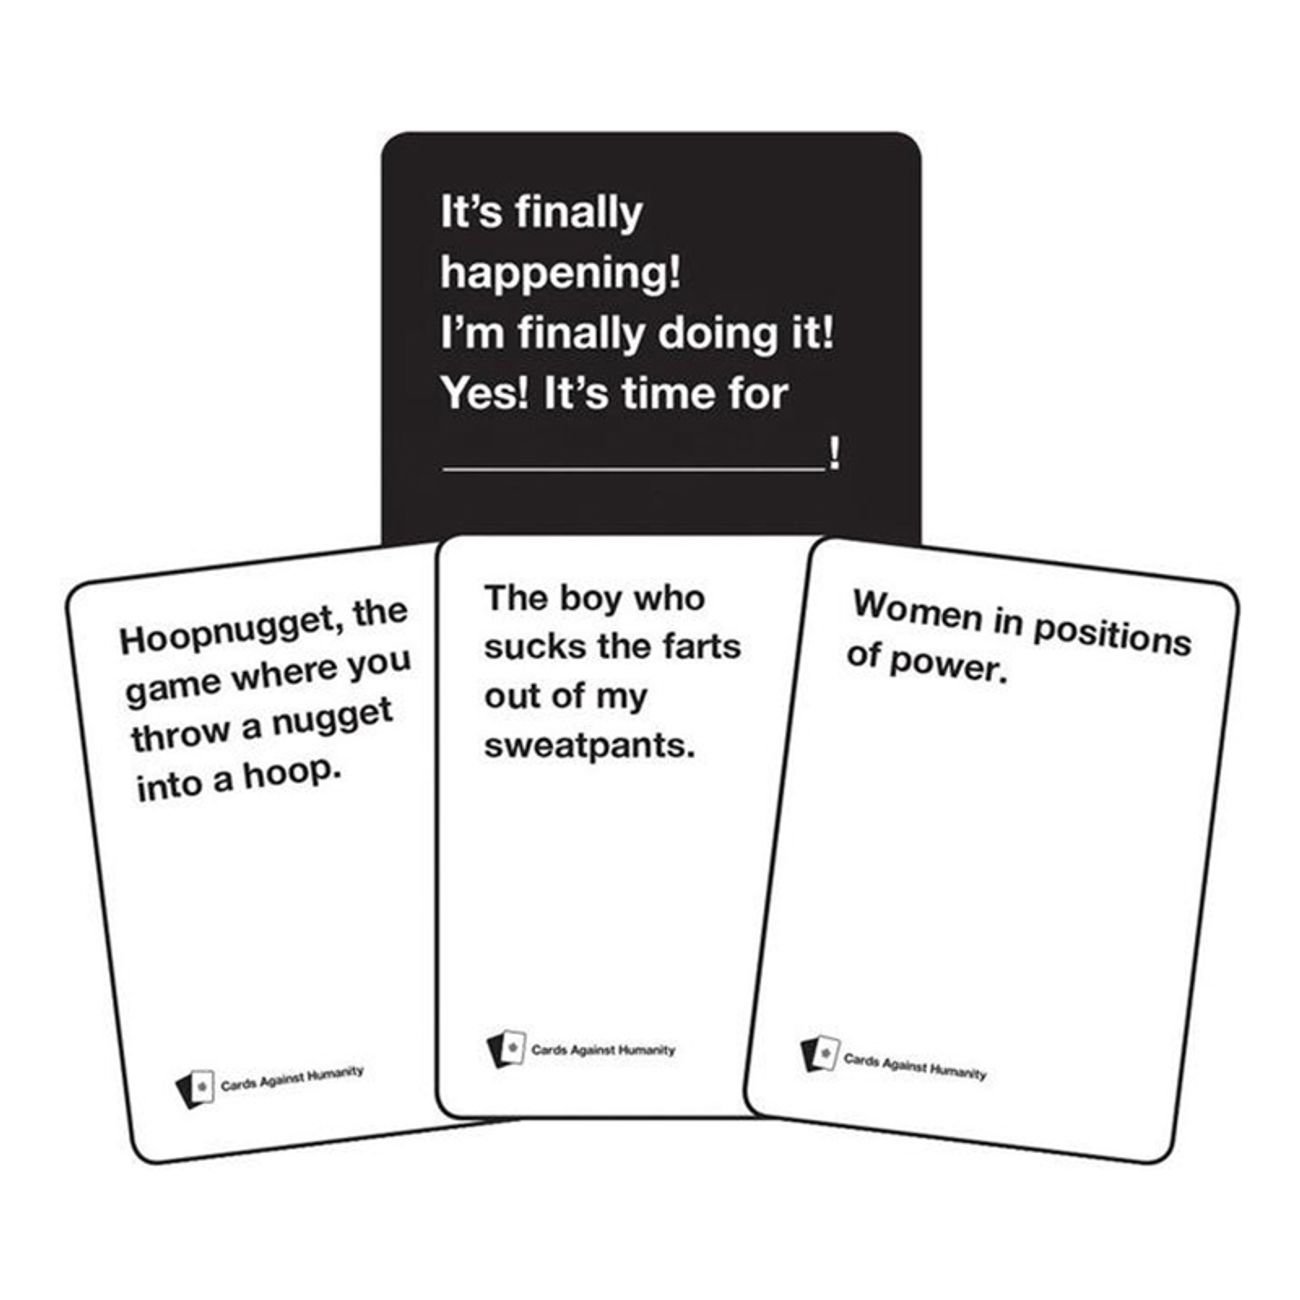 cards-against-humanity-22